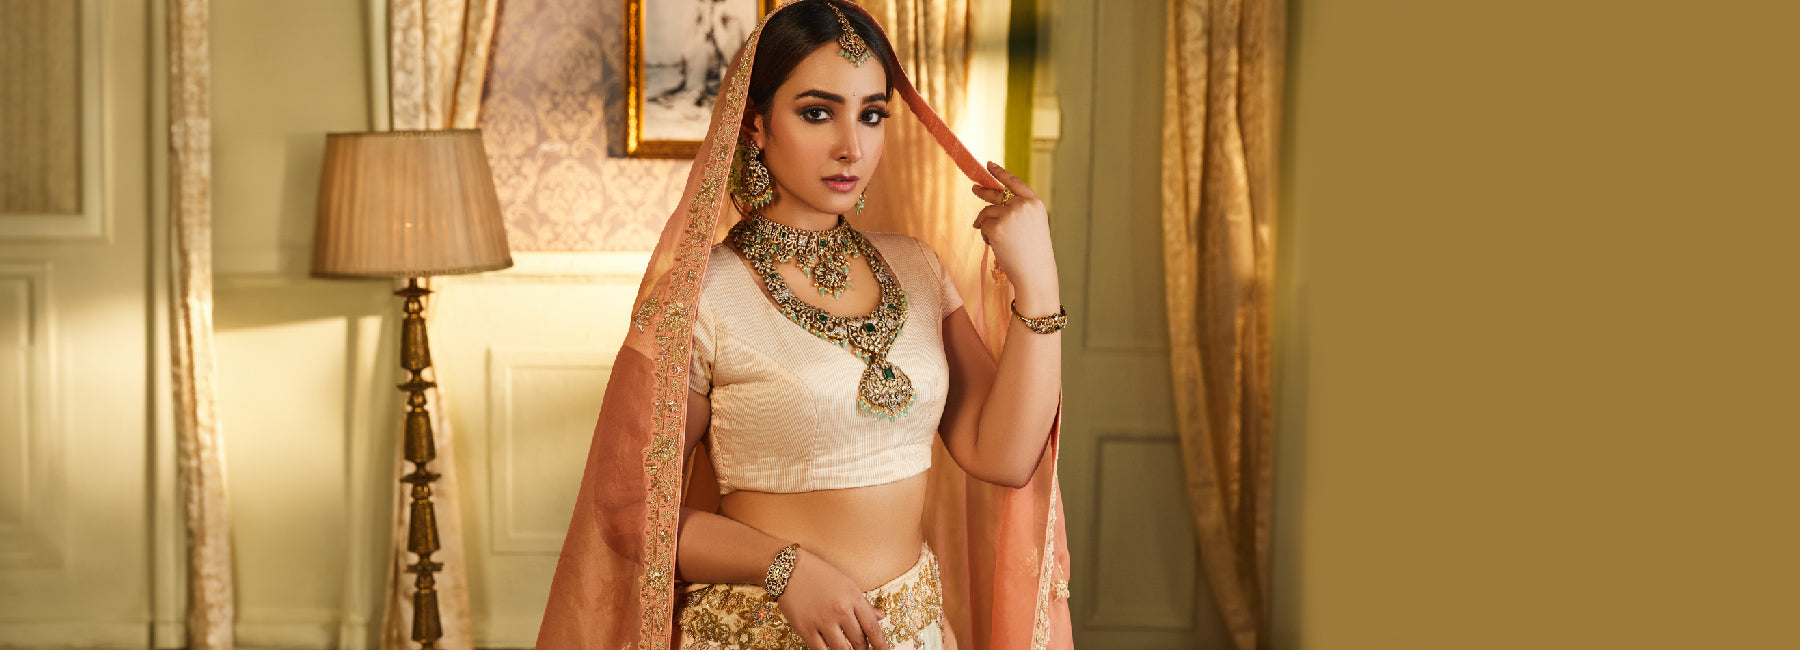 How to Choose the Perfect Indian Jewellery for Your Wedding Look